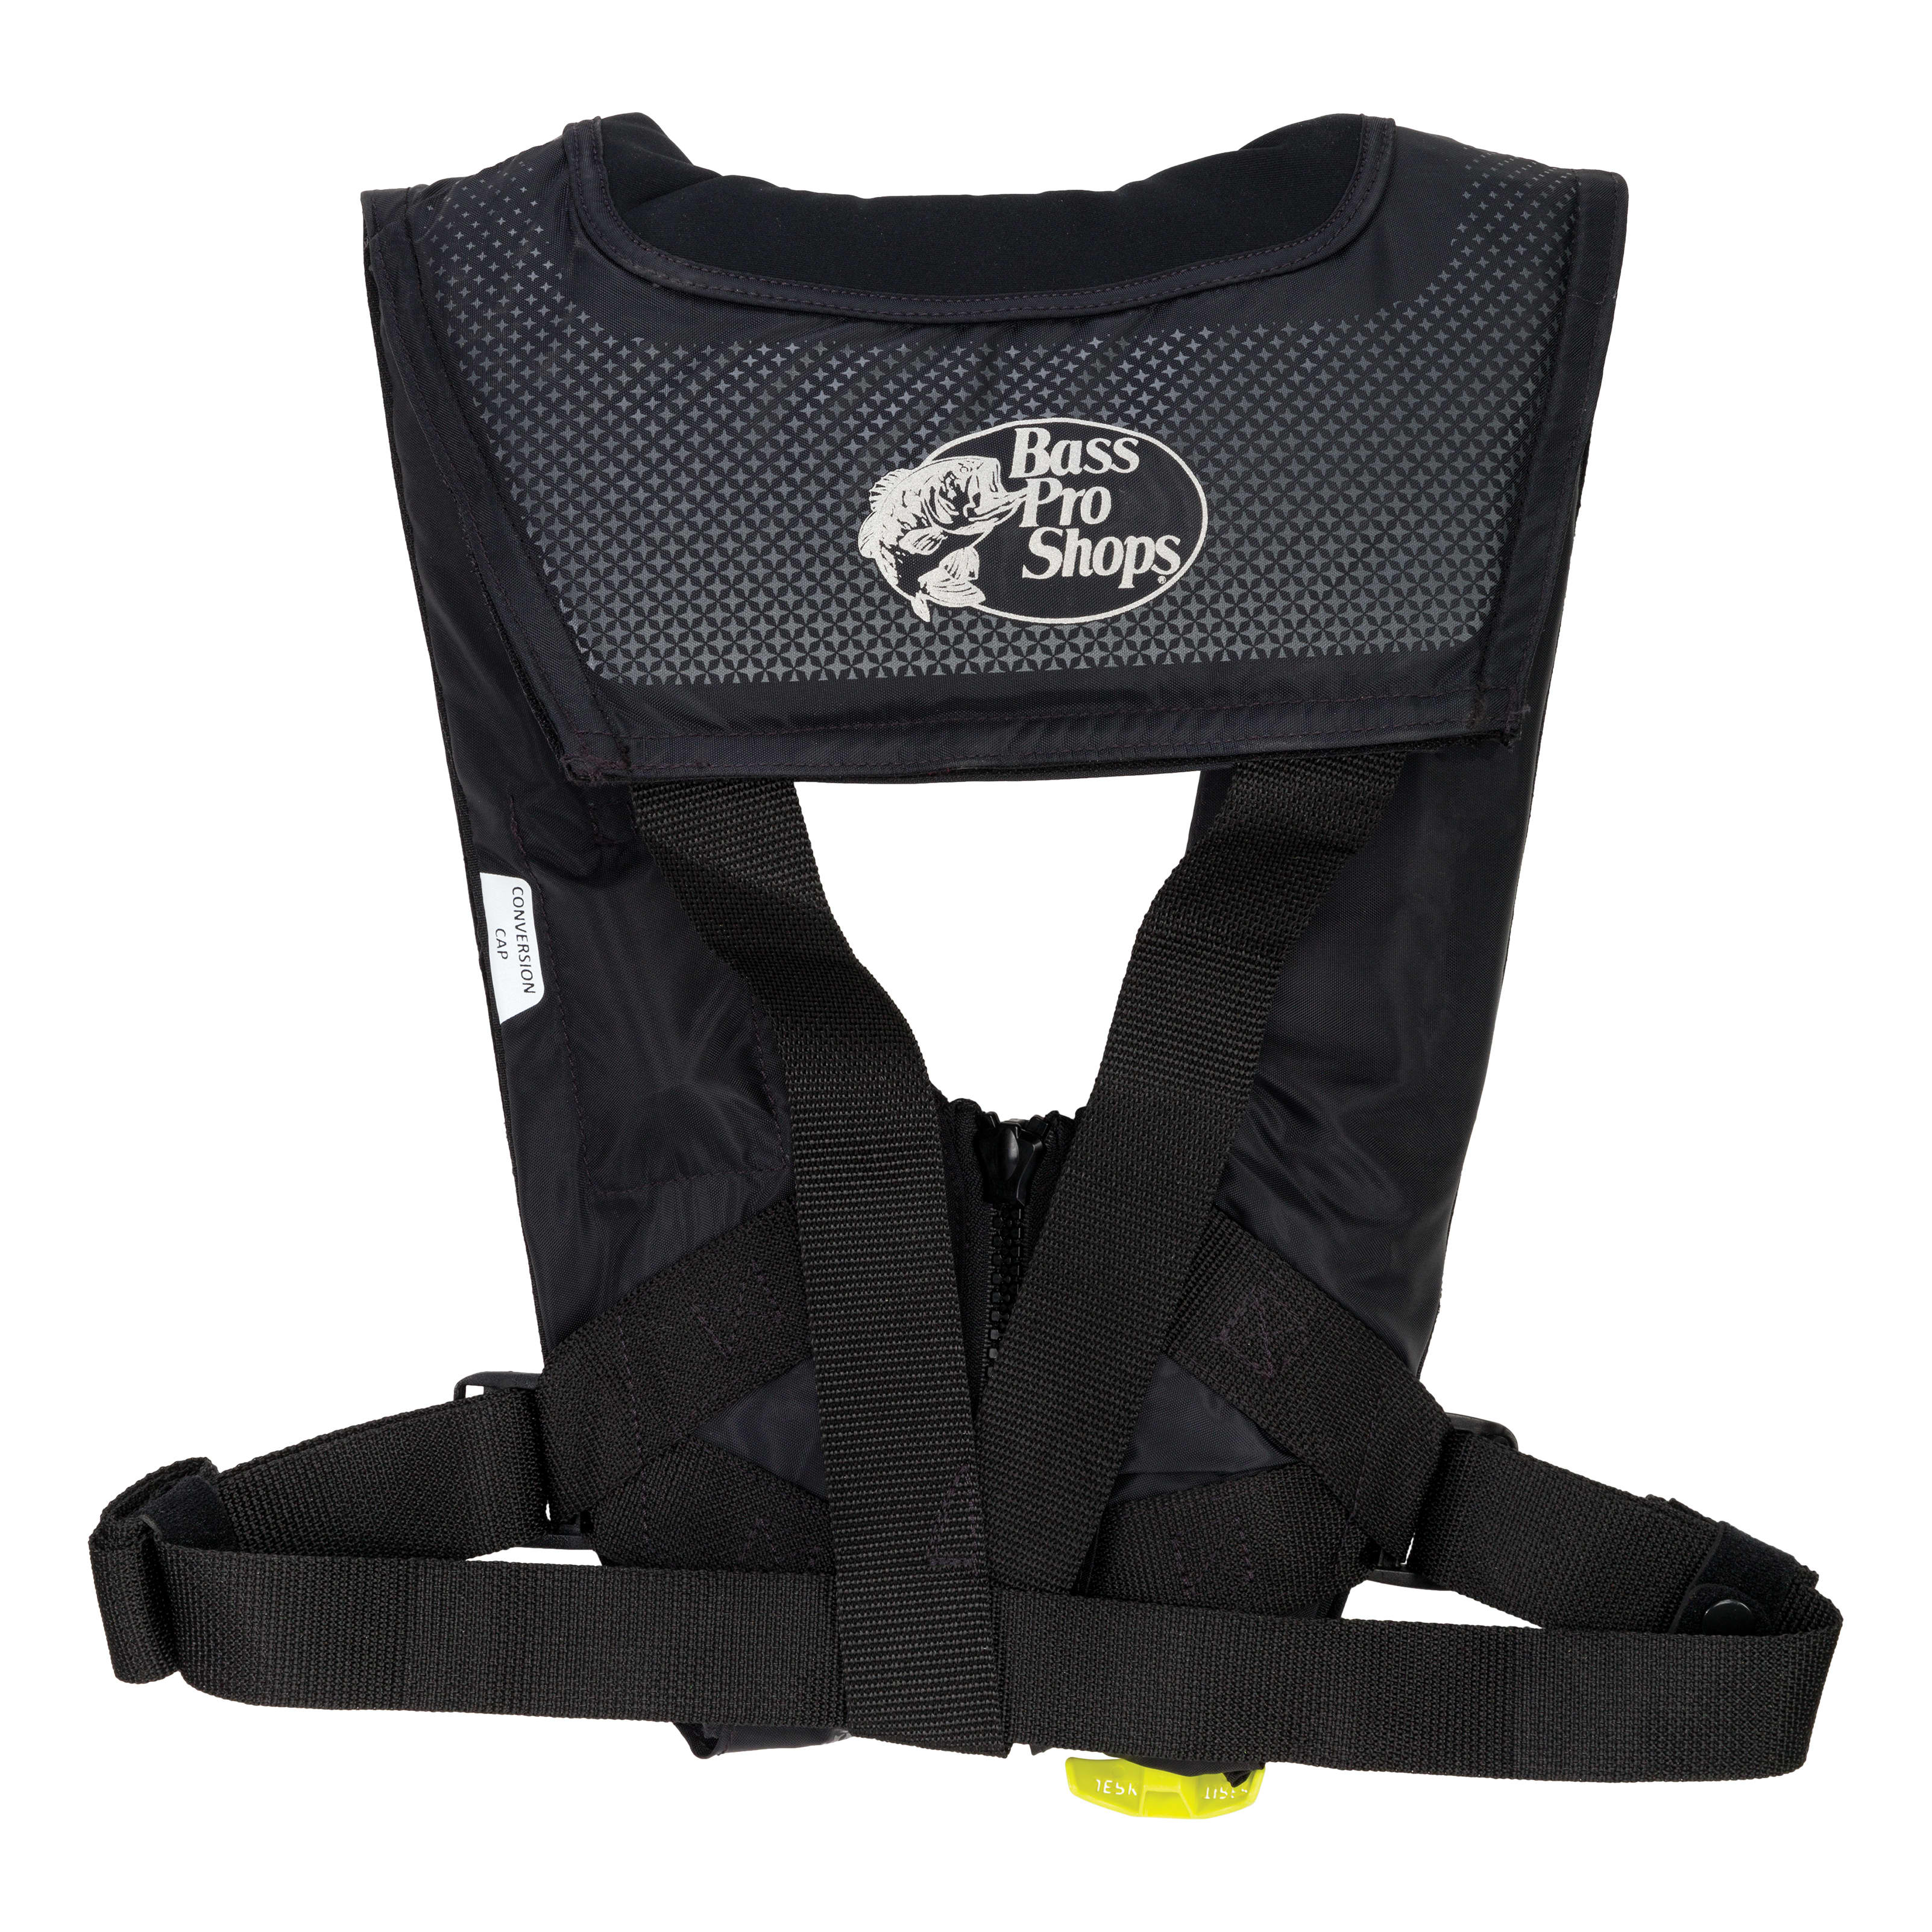 Bass Pro Shops® AM 33 All-Clear™ Auto/Manual-Inflatable Life Vest - Black - Back View